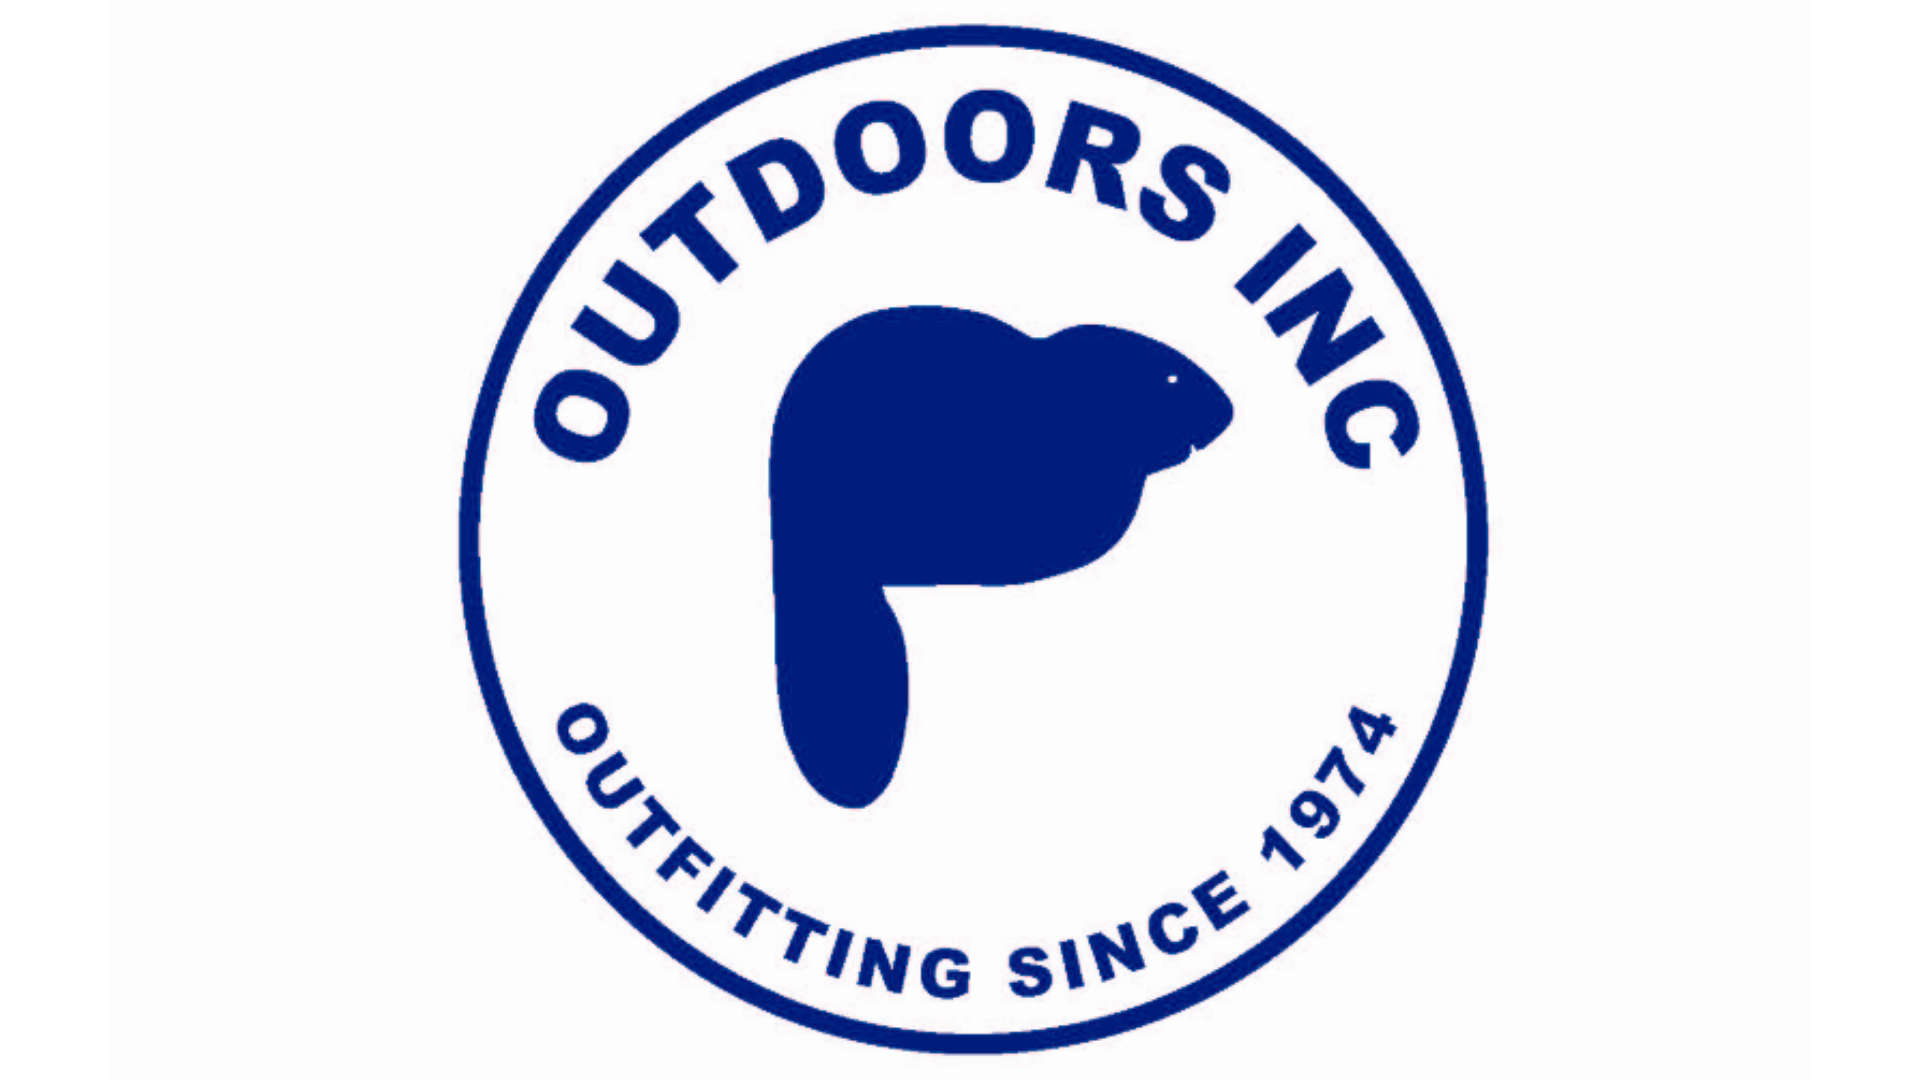 Outdoors, Inc.